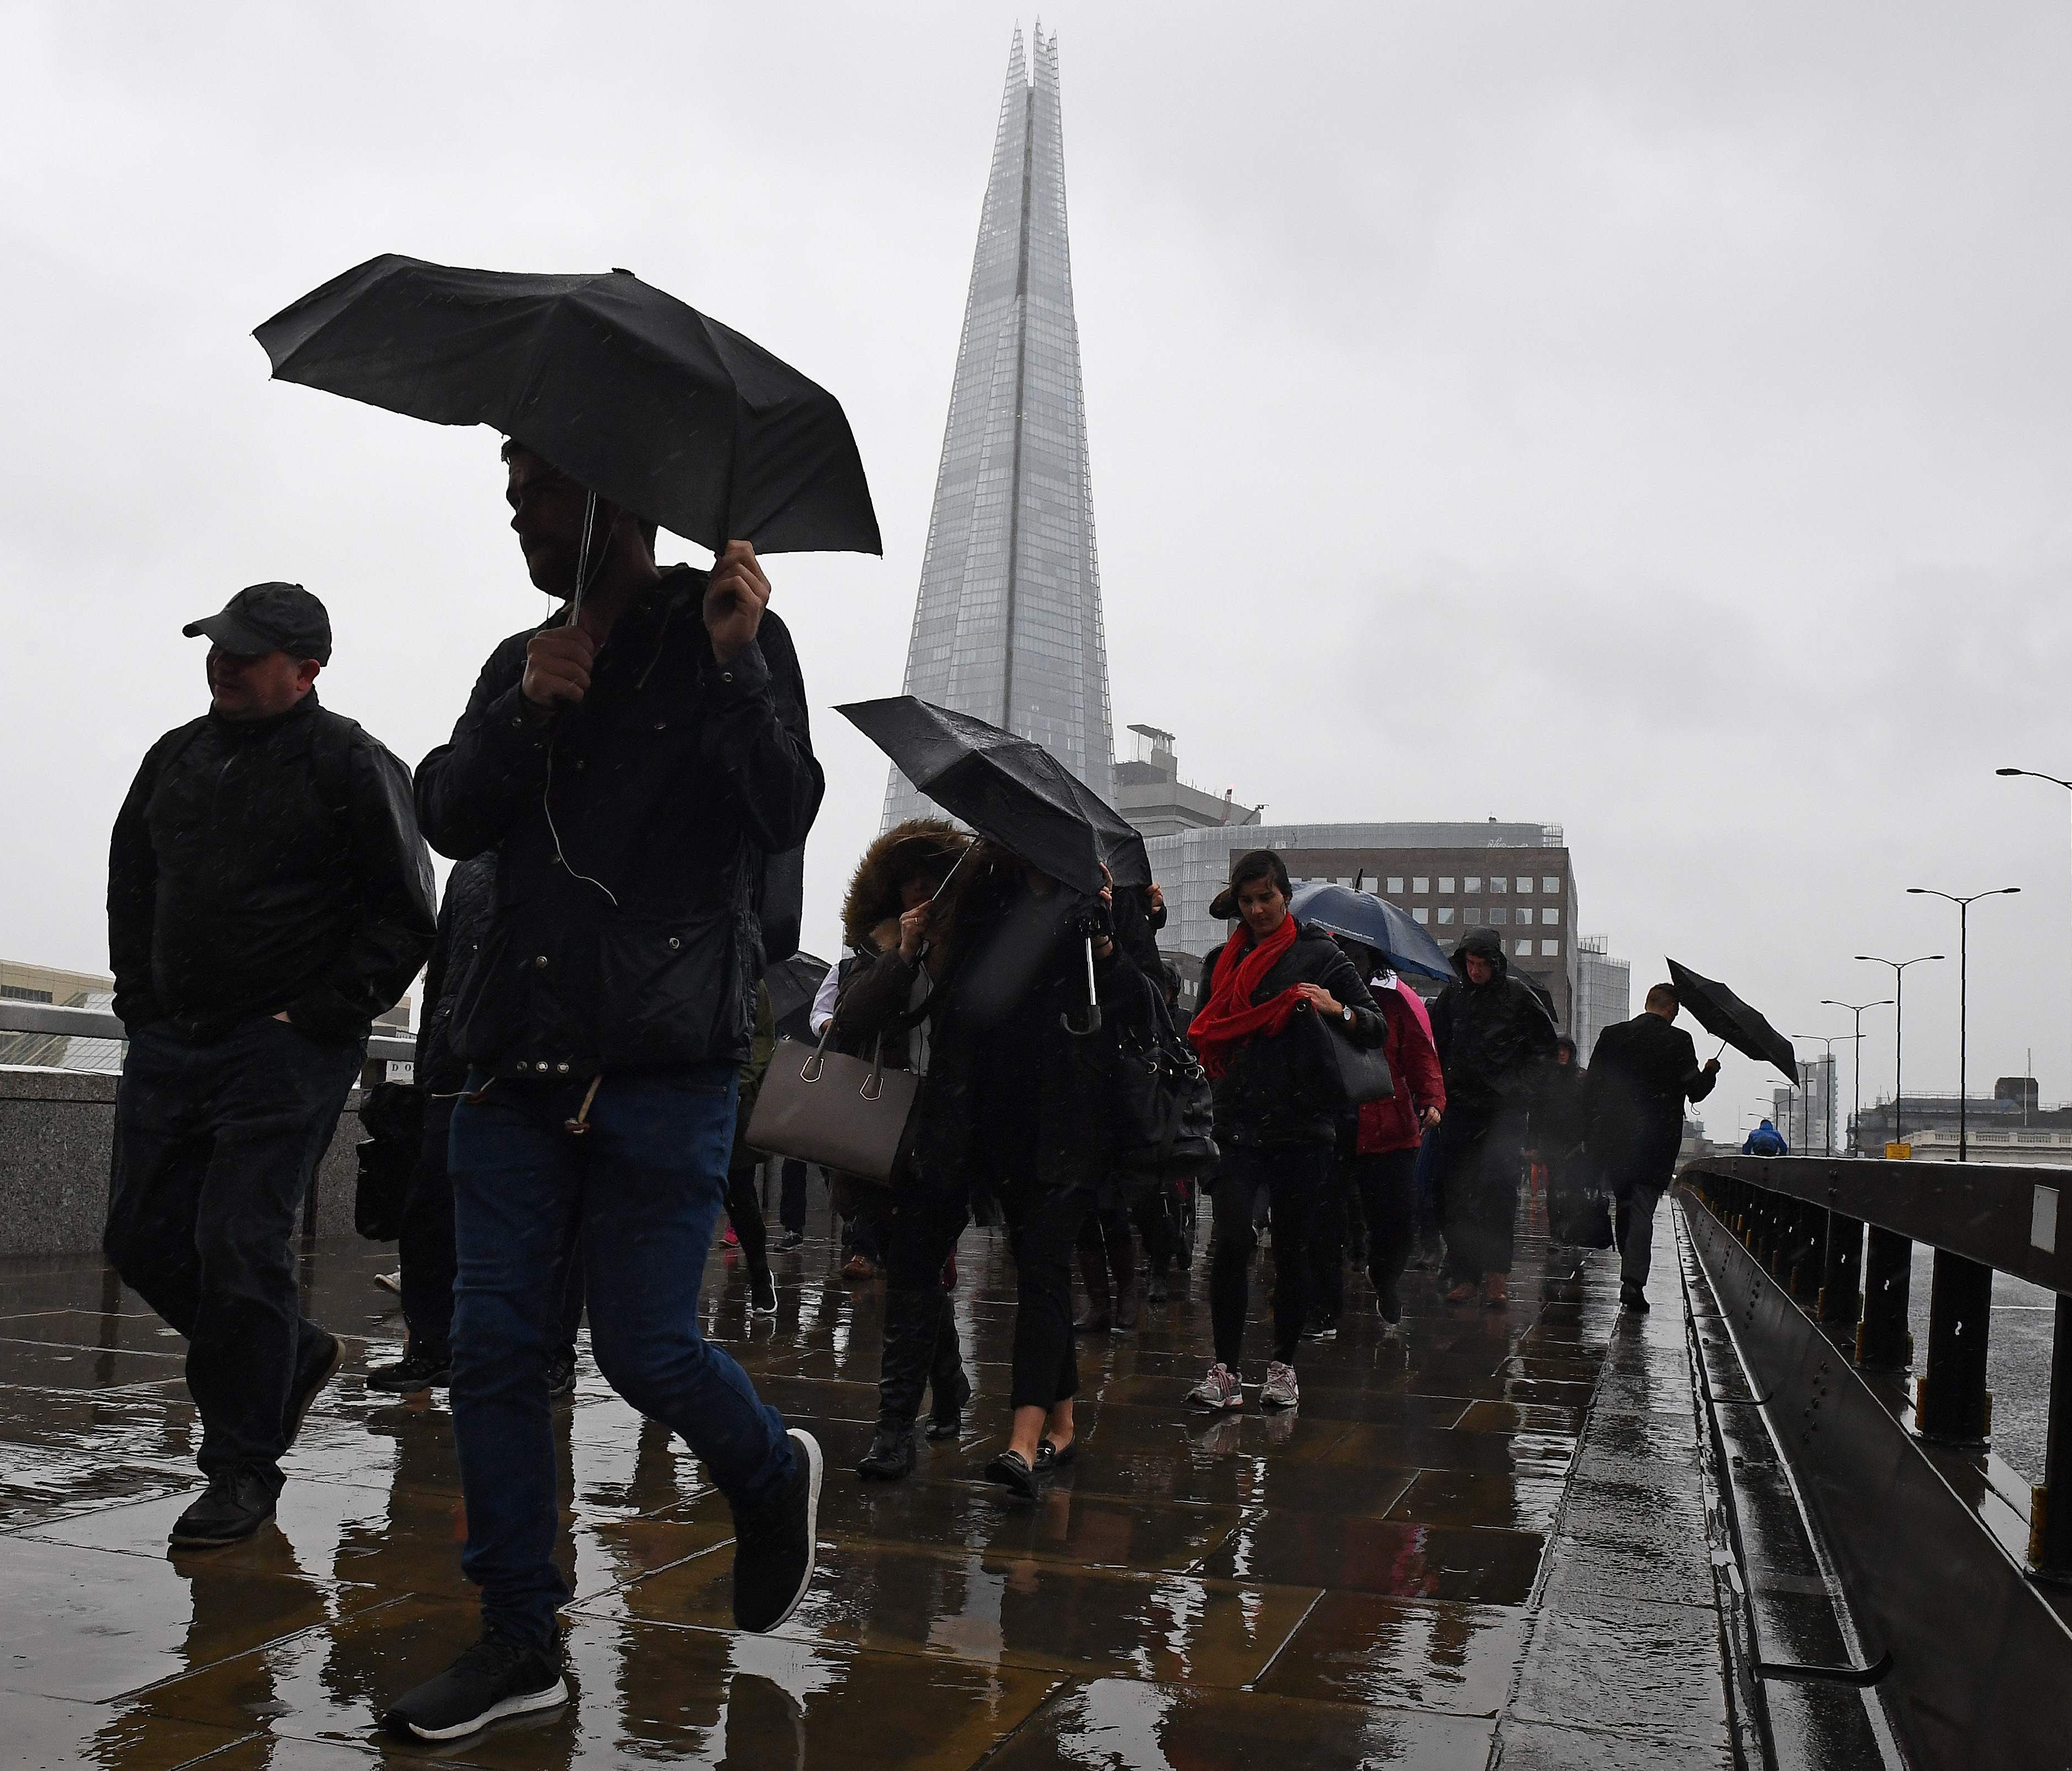 Commuters walk in the rain past a security barrier installed between the pavement and the road on London Bridge in London on June 6, 2017, as the police investigations continue following the June 3 terror attack.